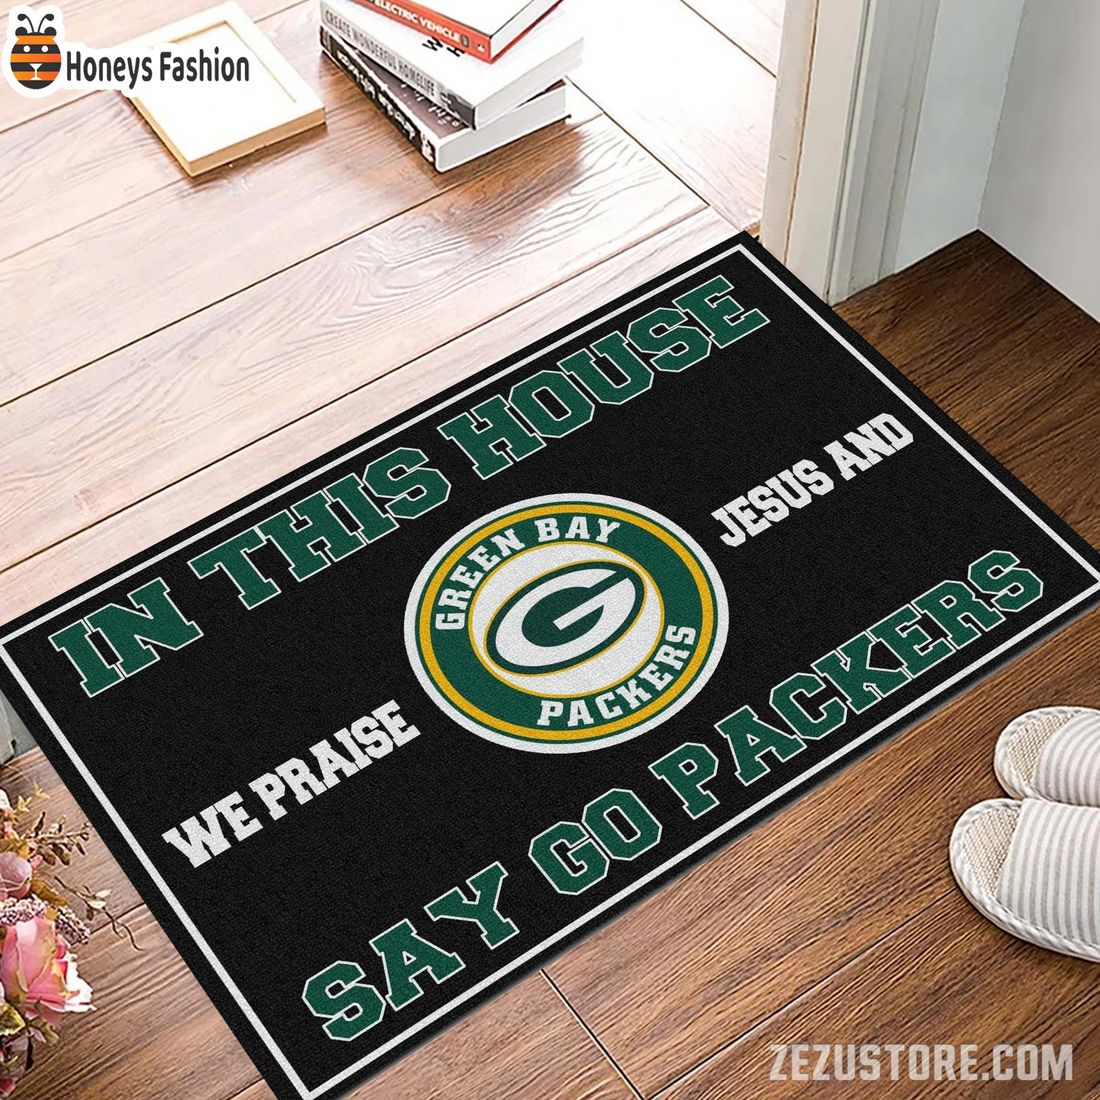 In this house we praise jesus and say go Packers doormat